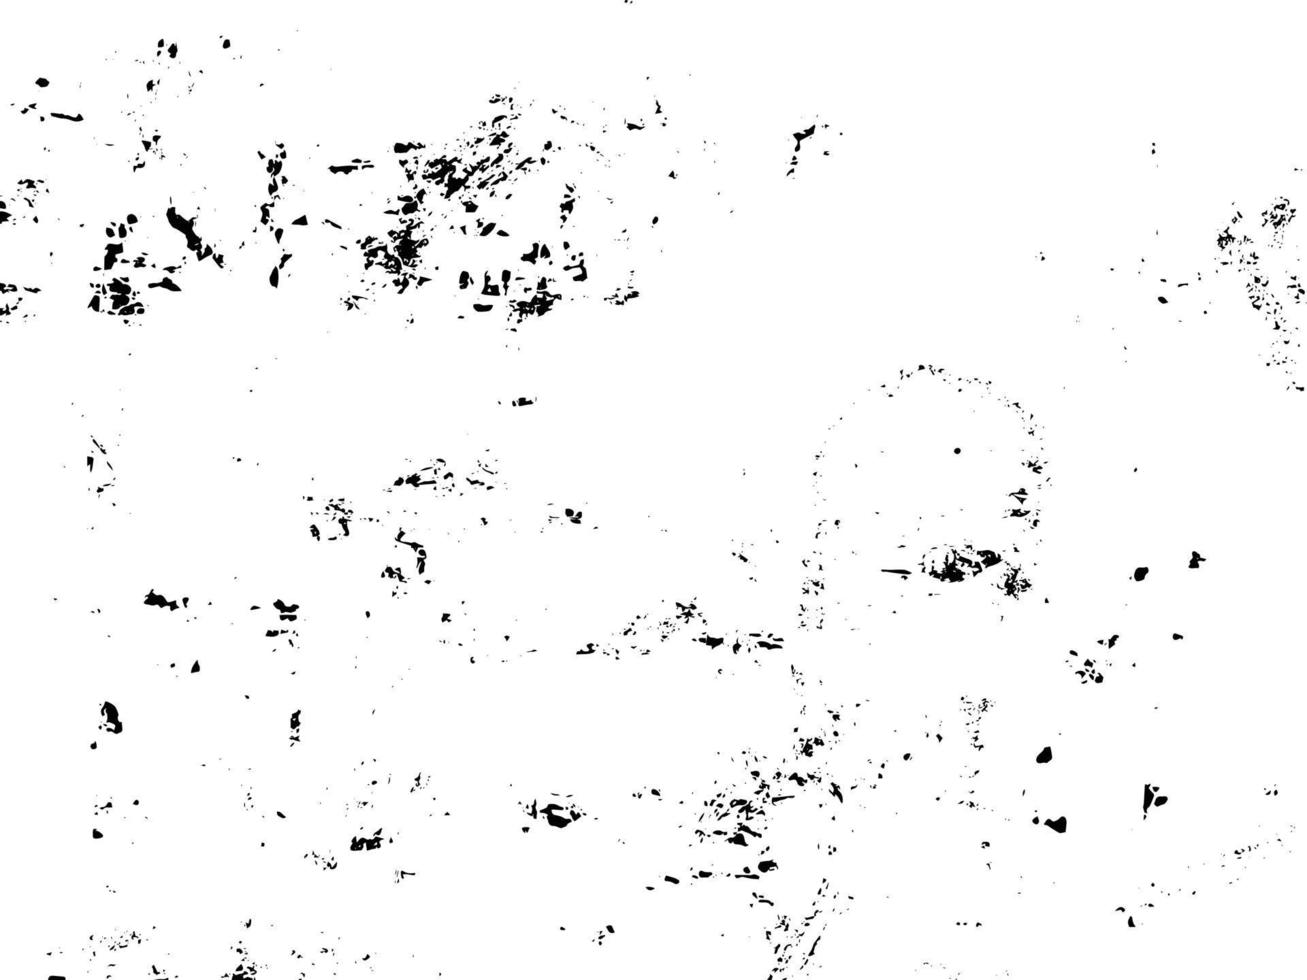 Rust and dirt overlay black and white texture vector